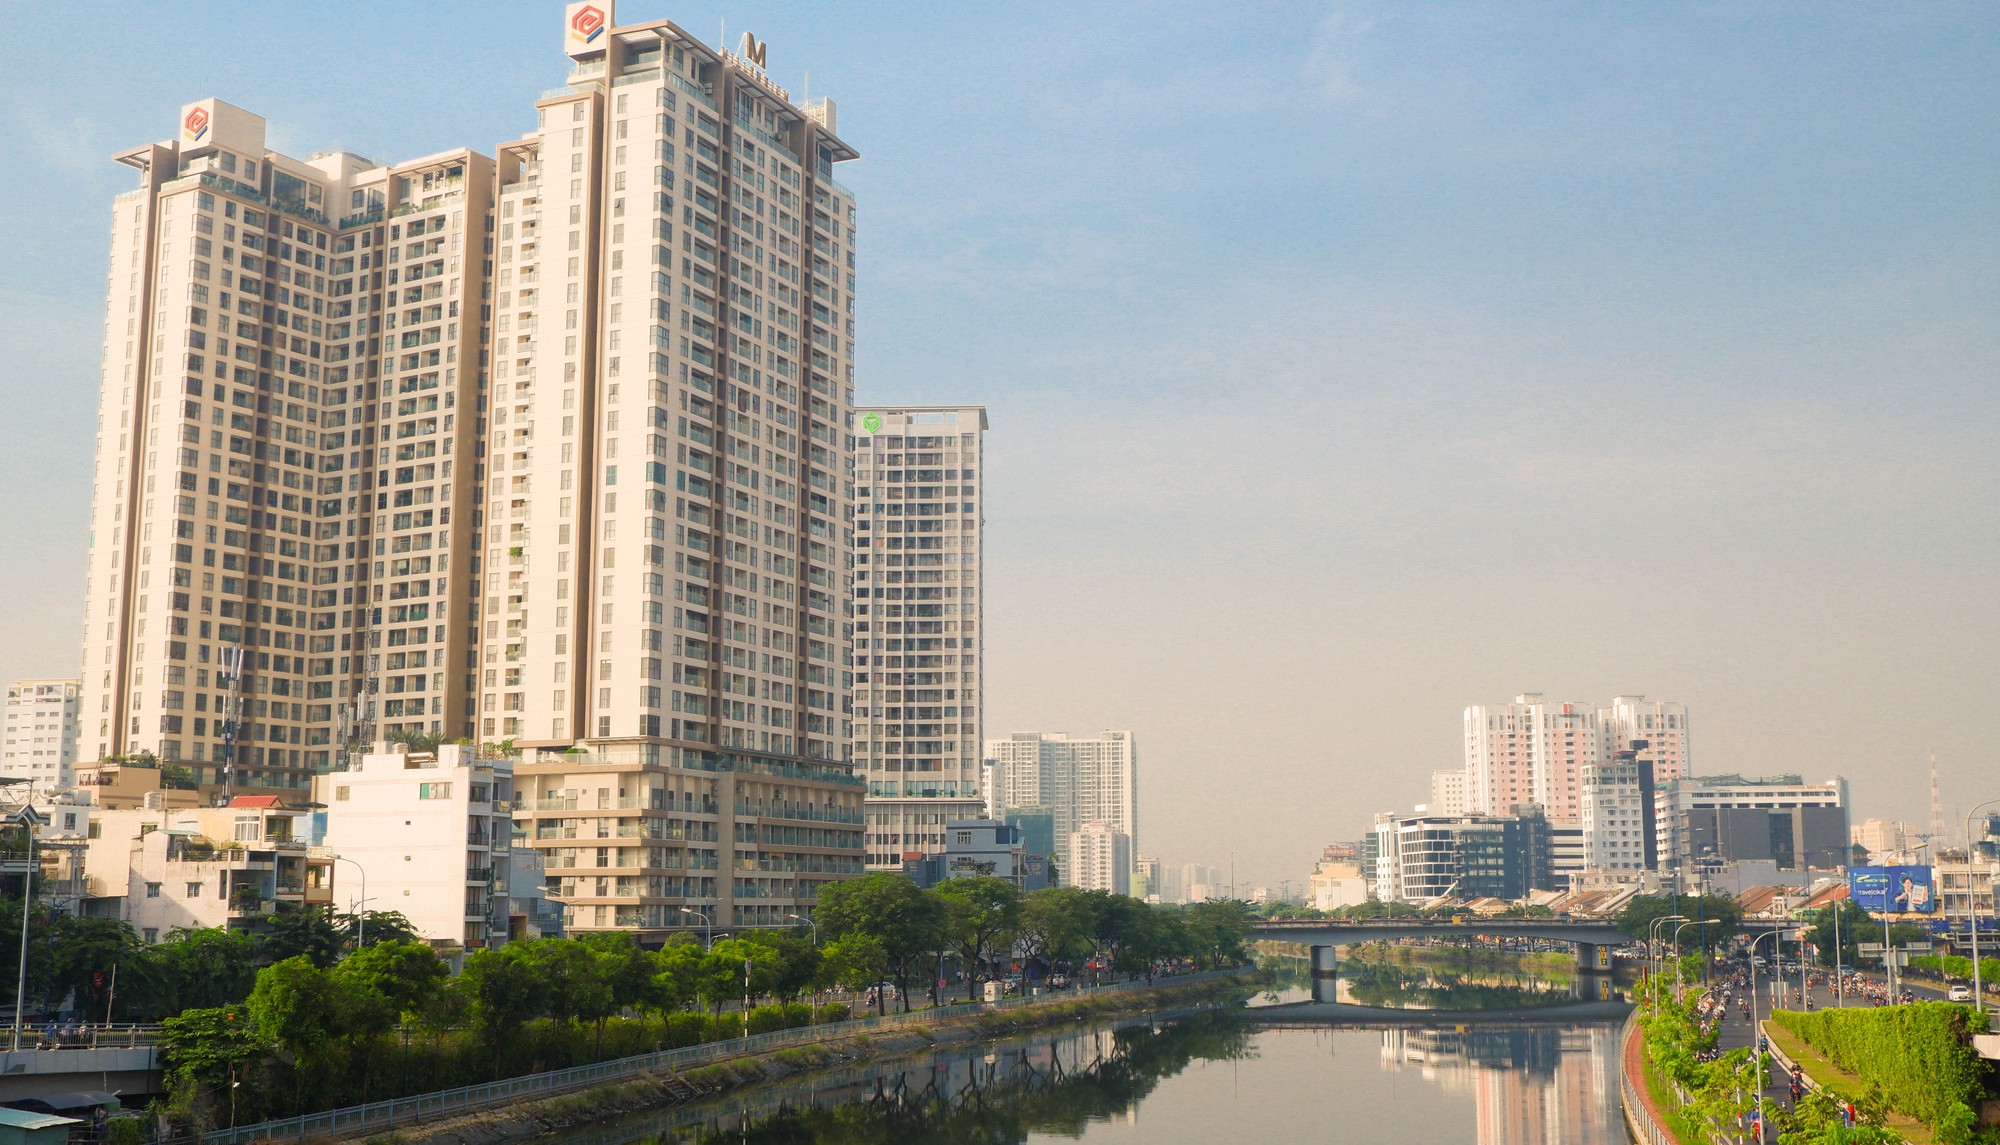 Apartment prices are sky-high in the district with the highest population density in Vietnam - Photo 5.